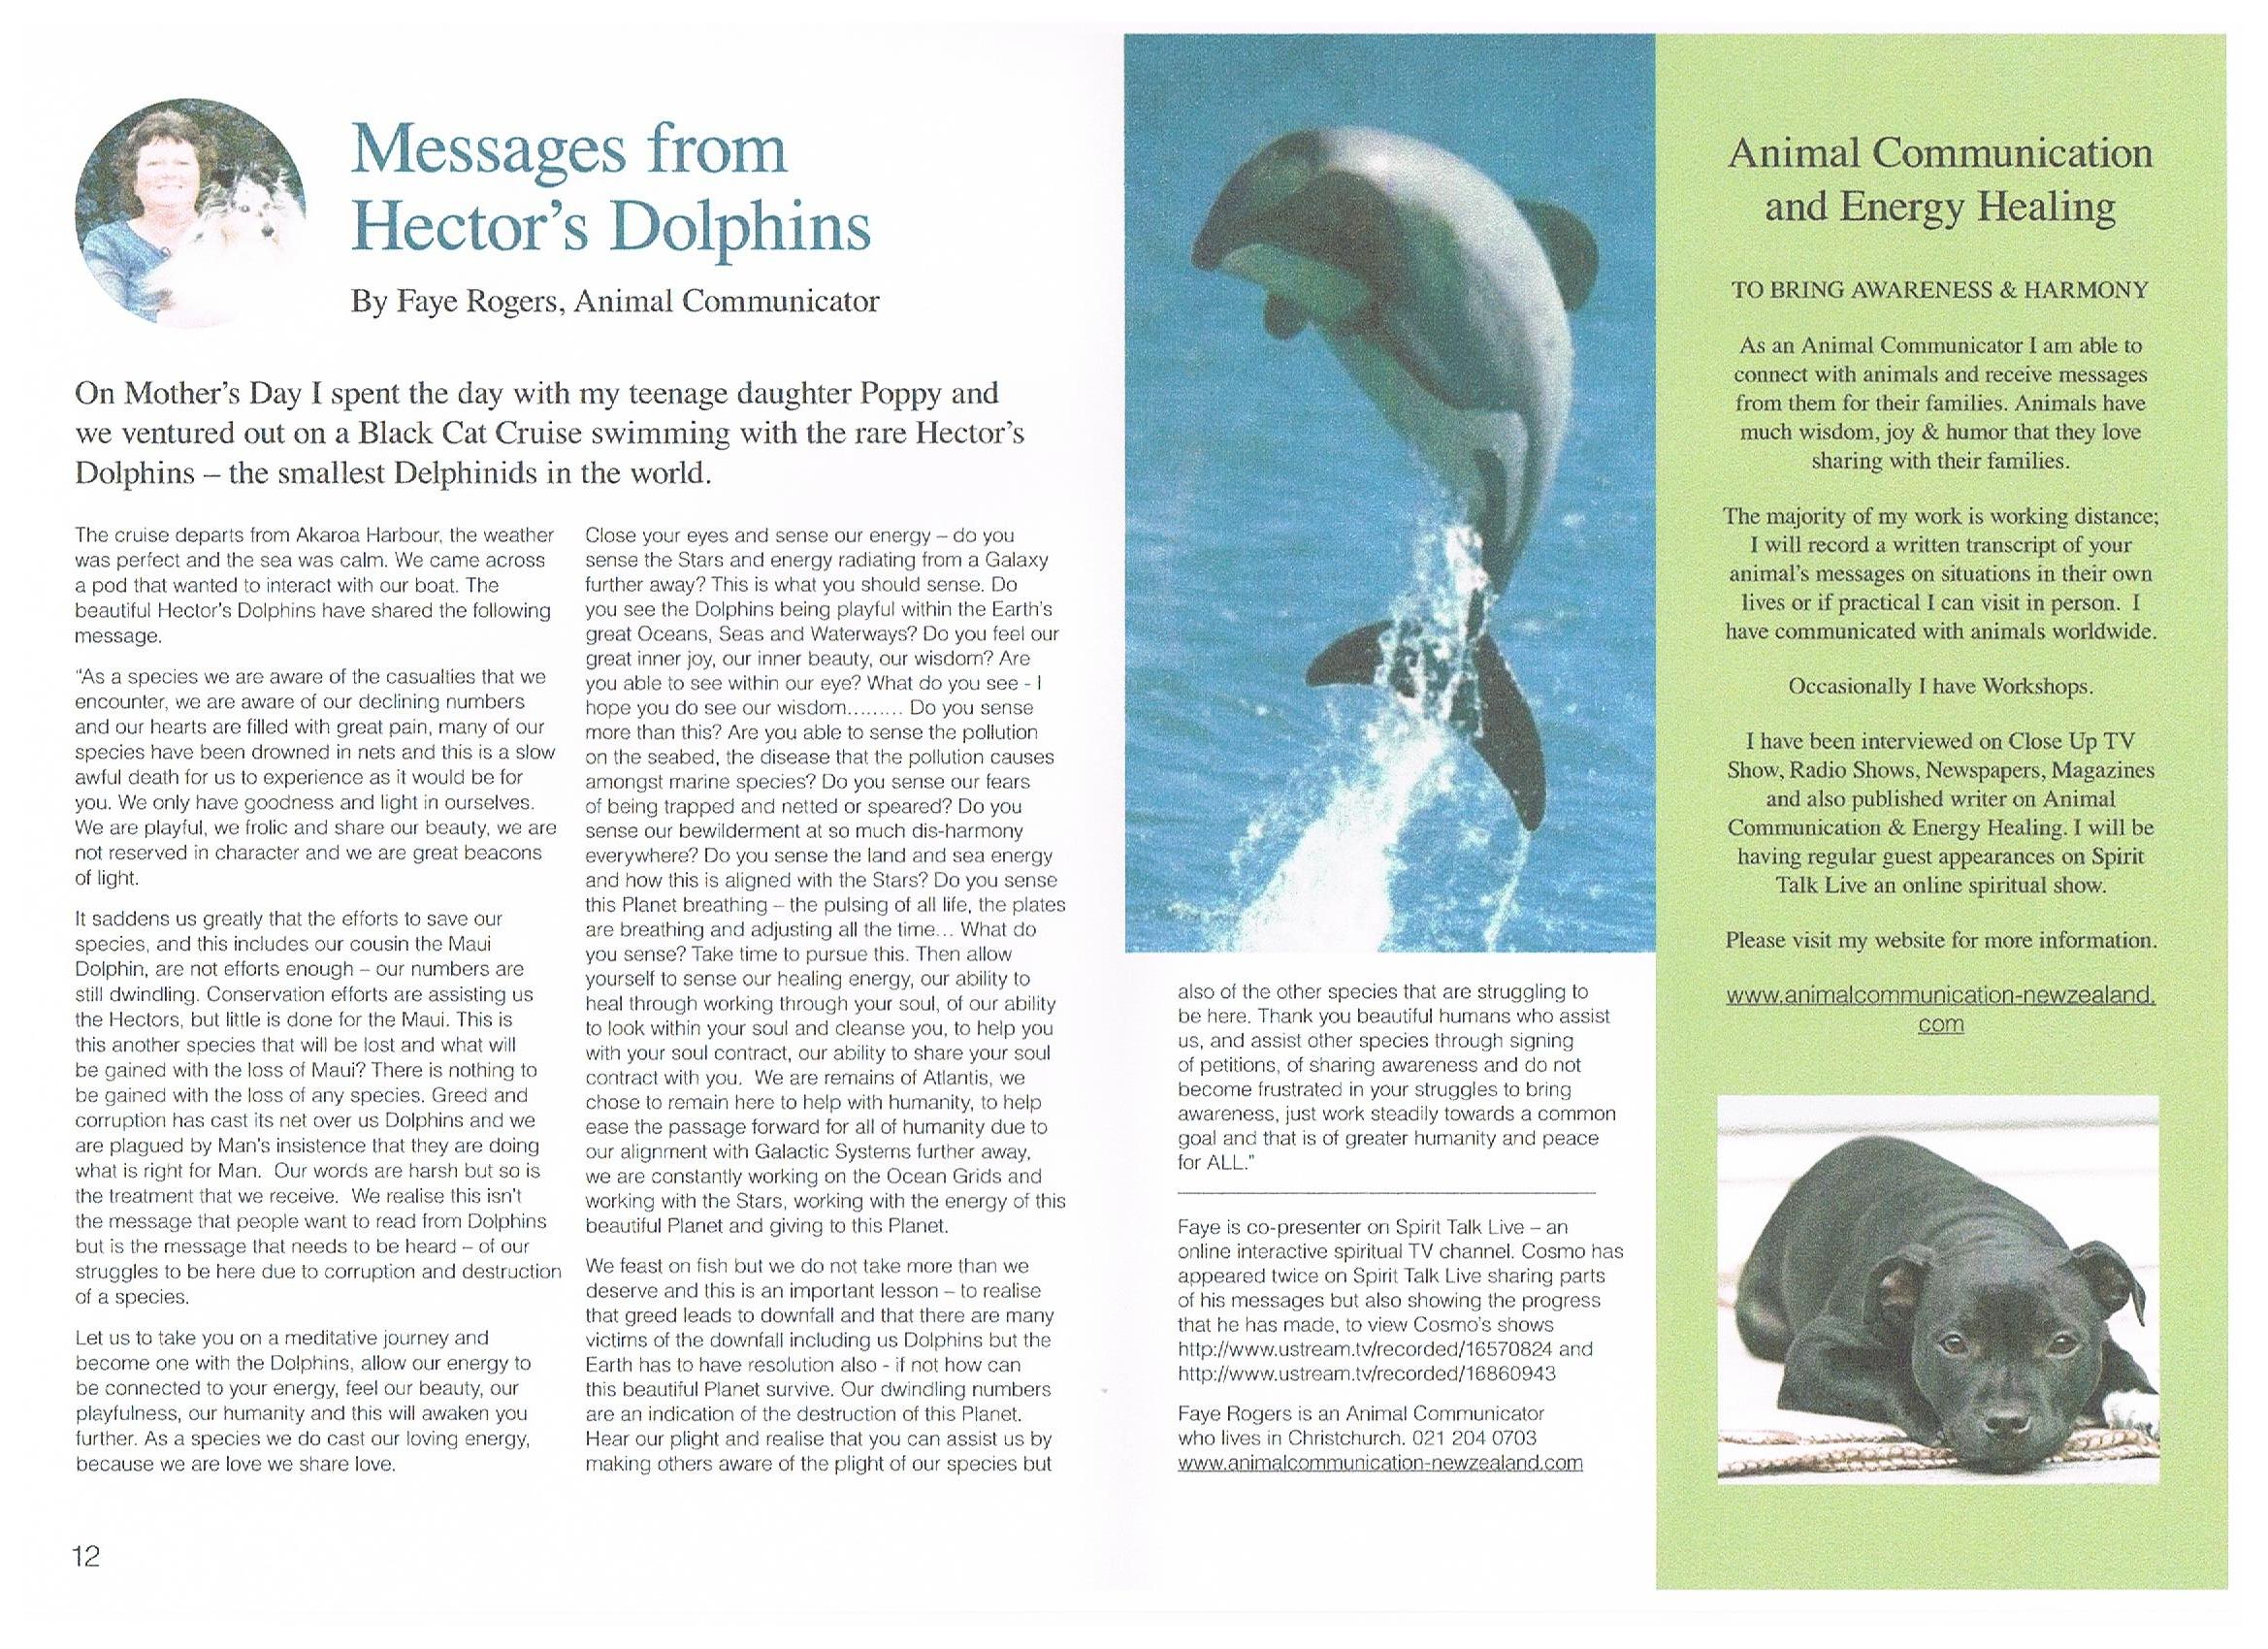 Into Light Magazine - June 2012 - Messages from Hector's Dolphins - Faye  Rogers - Animal Communication - New Zealand